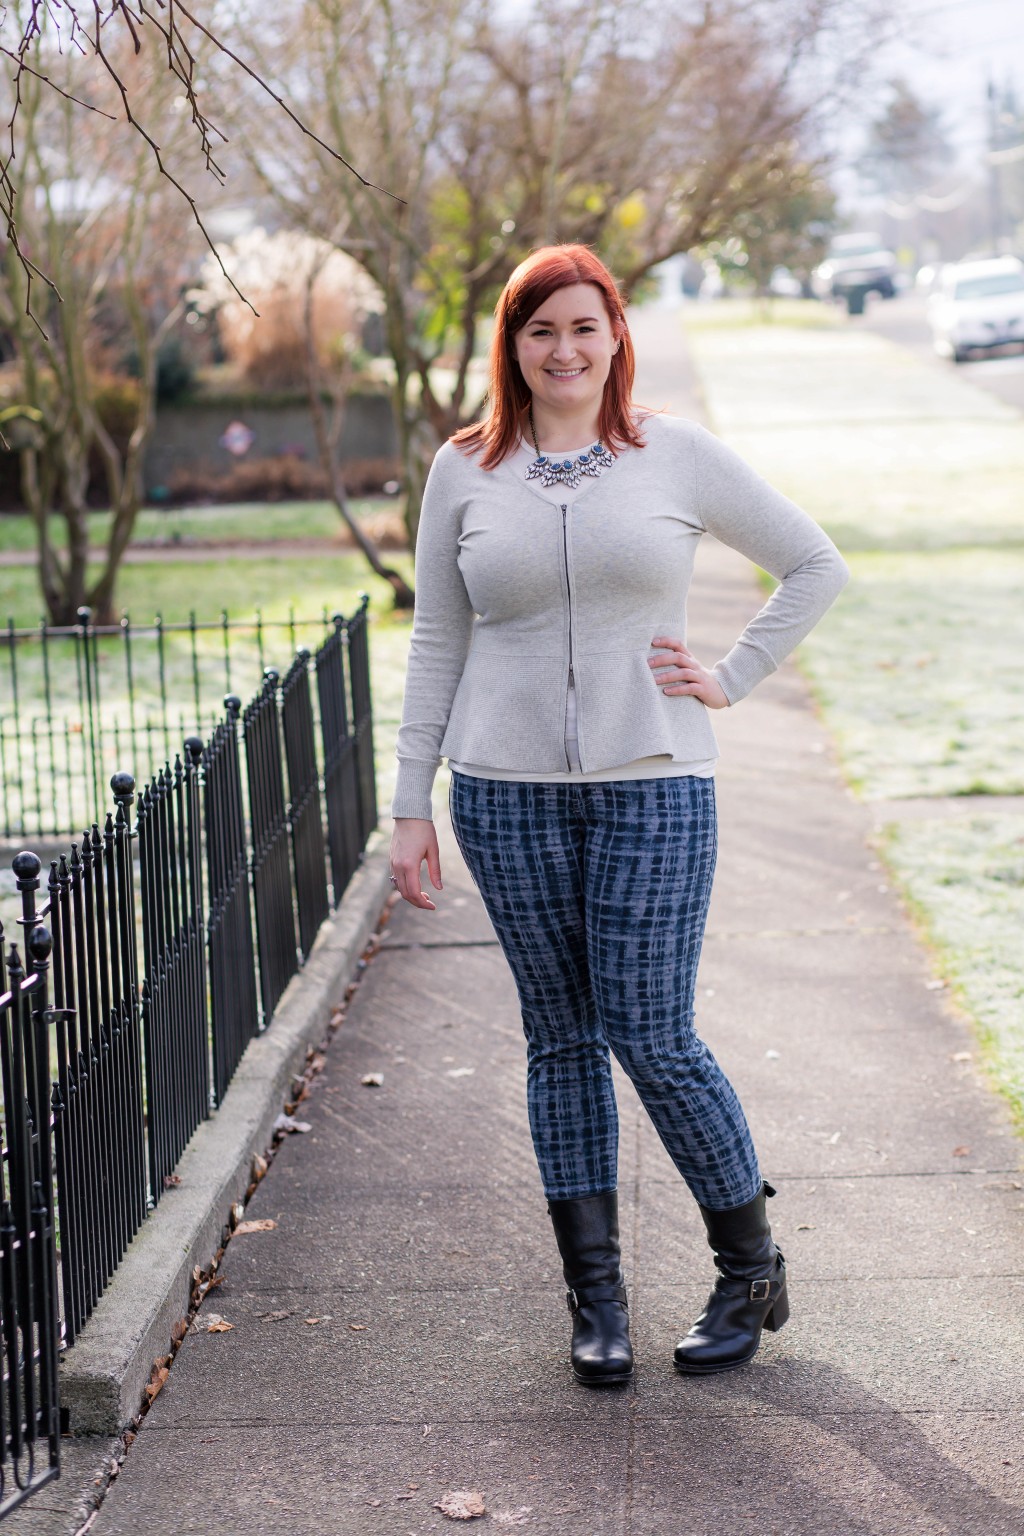 6 - Kate Retherford of All Things Kate, Snohomish Fashion Blogger